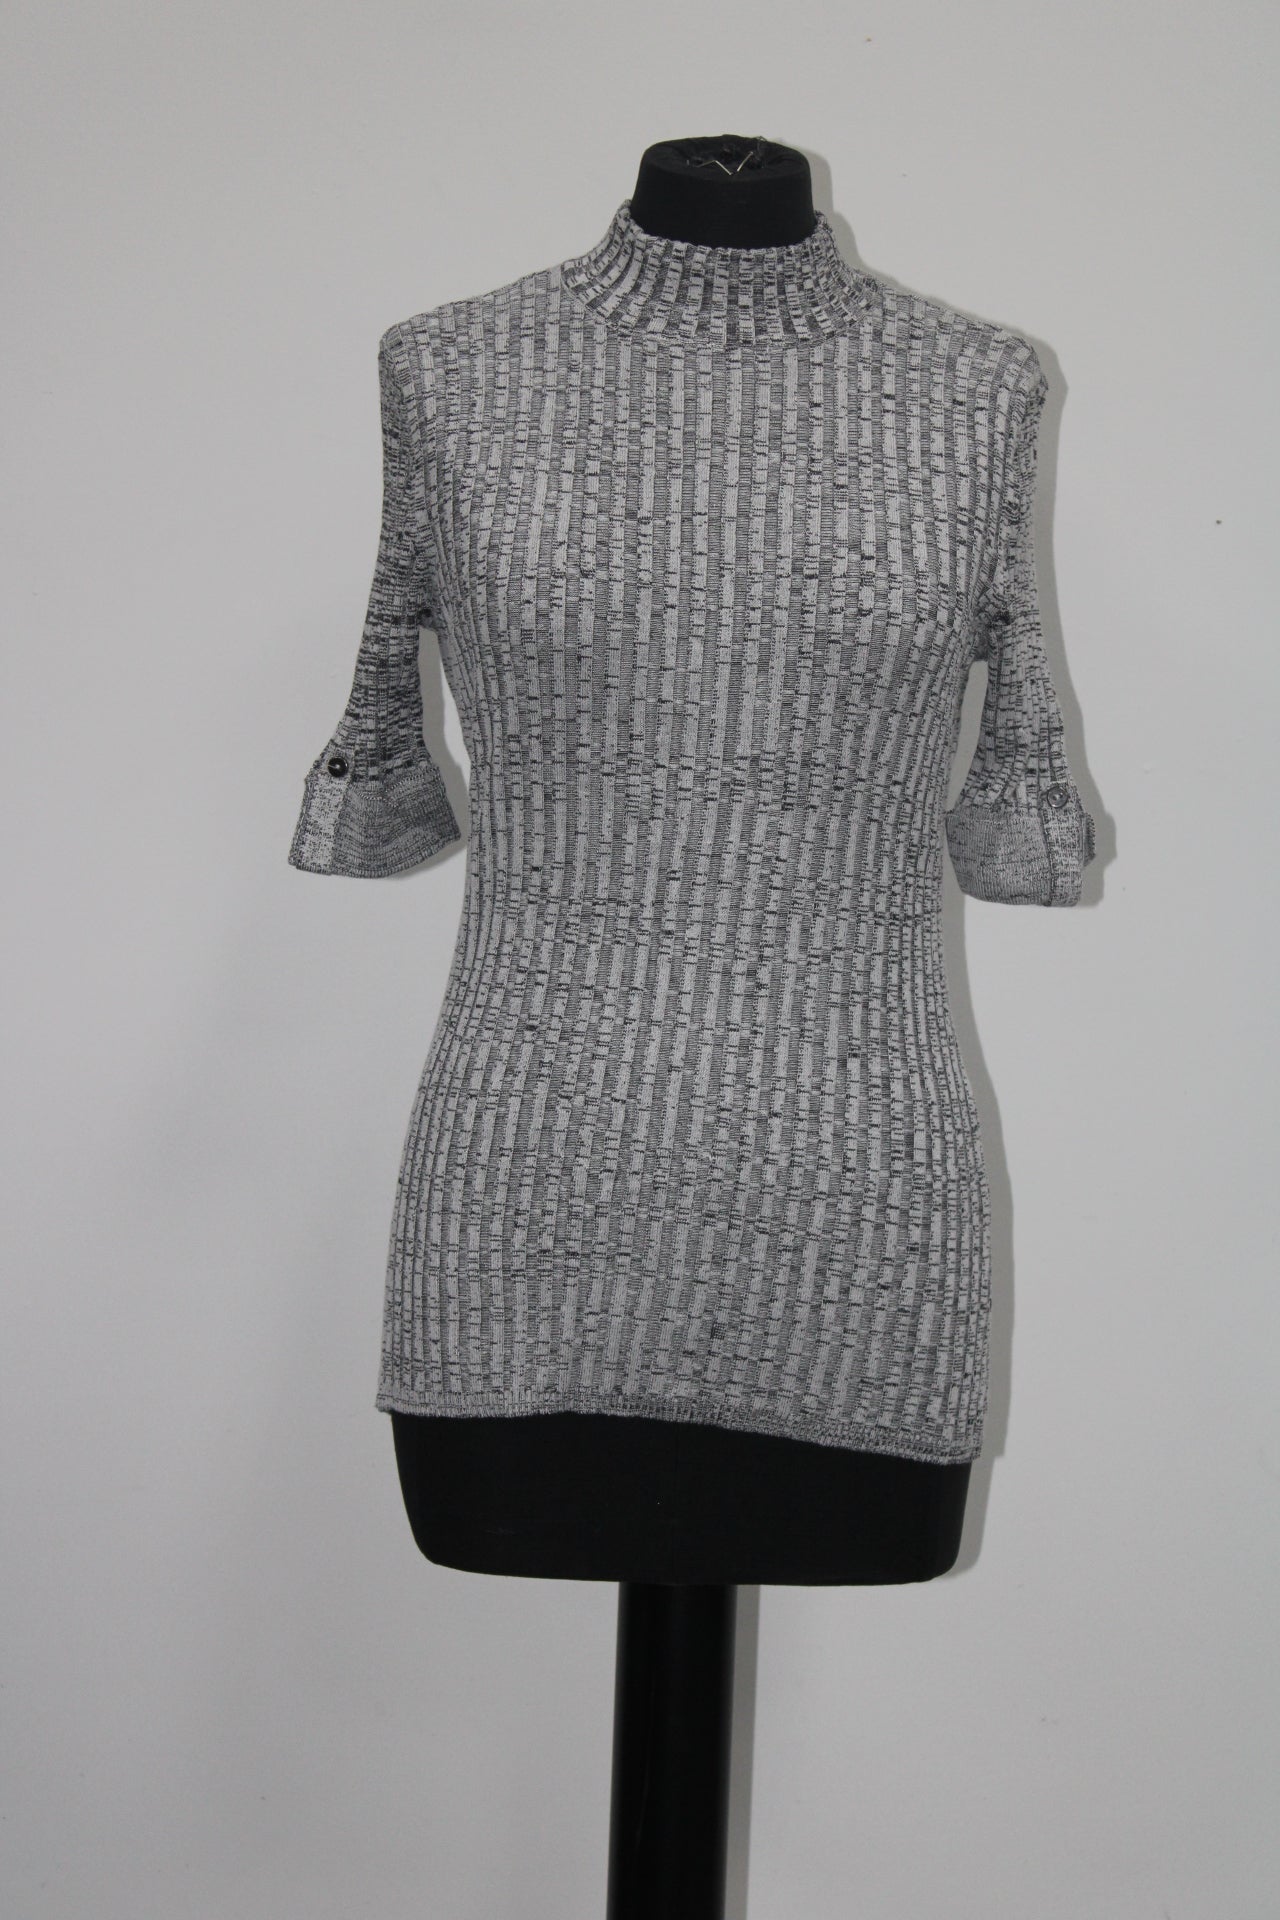 STYLE & CO WOMEN'S MOCK-NECK SWEATER, GREY, PM - NEW WITHOUT TAG 11026